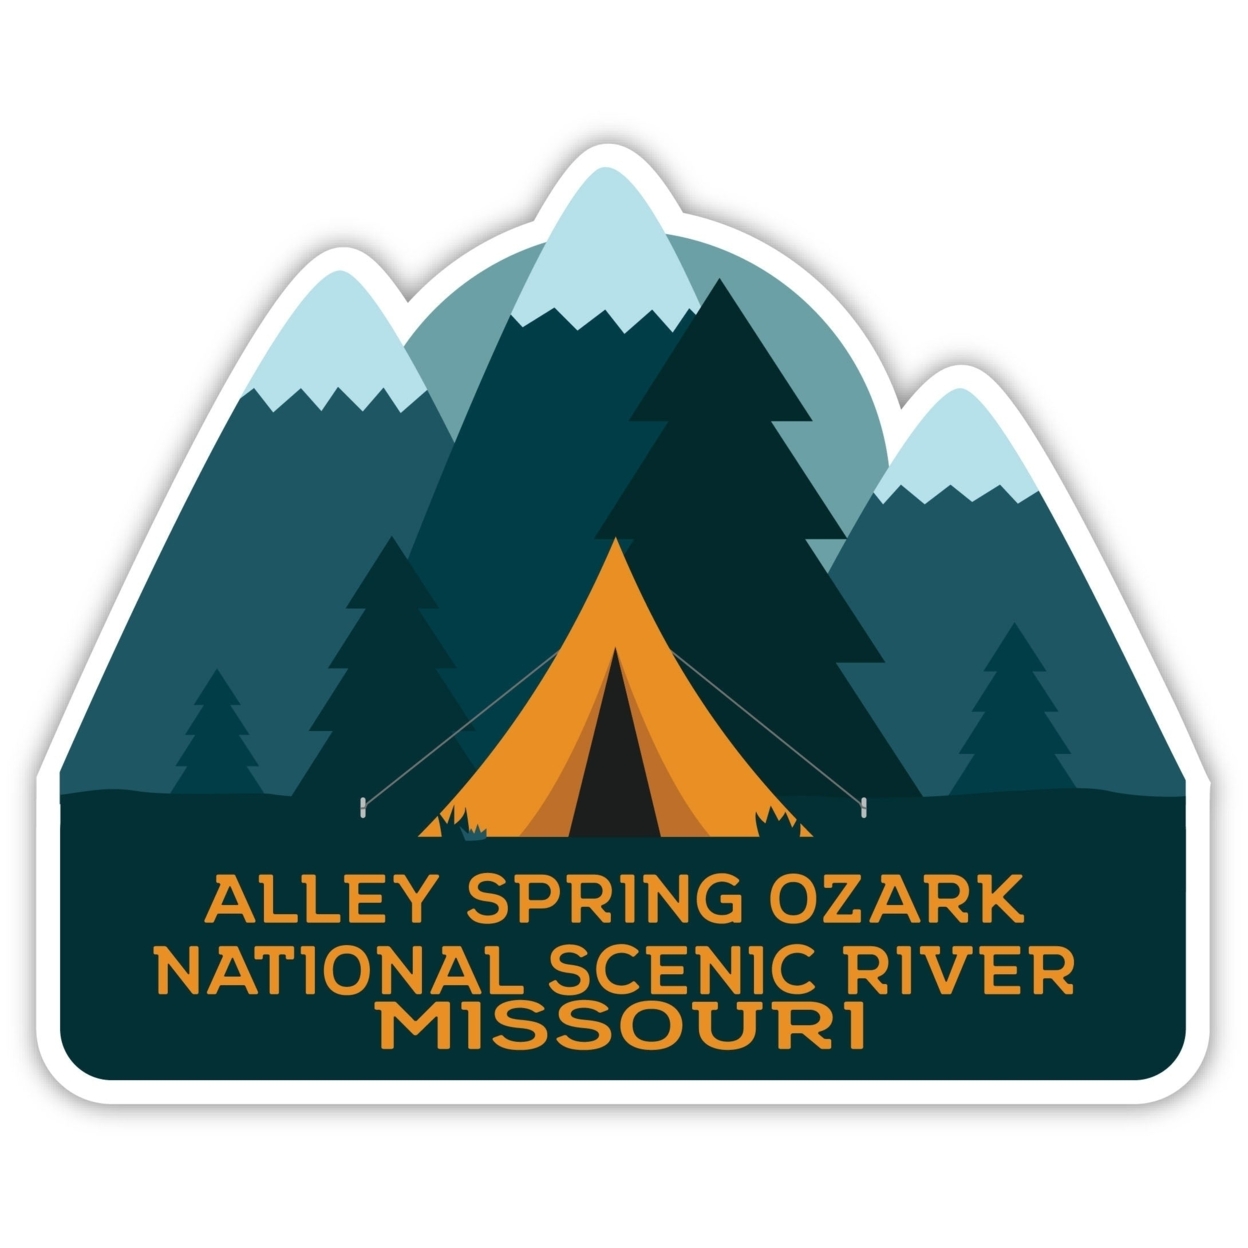 Alley Spring Ozark National Scenic River Missouri Souvenir Decorative Stickers (Choose Theme And Size) - 4-Pack, 4-Inch, Tent